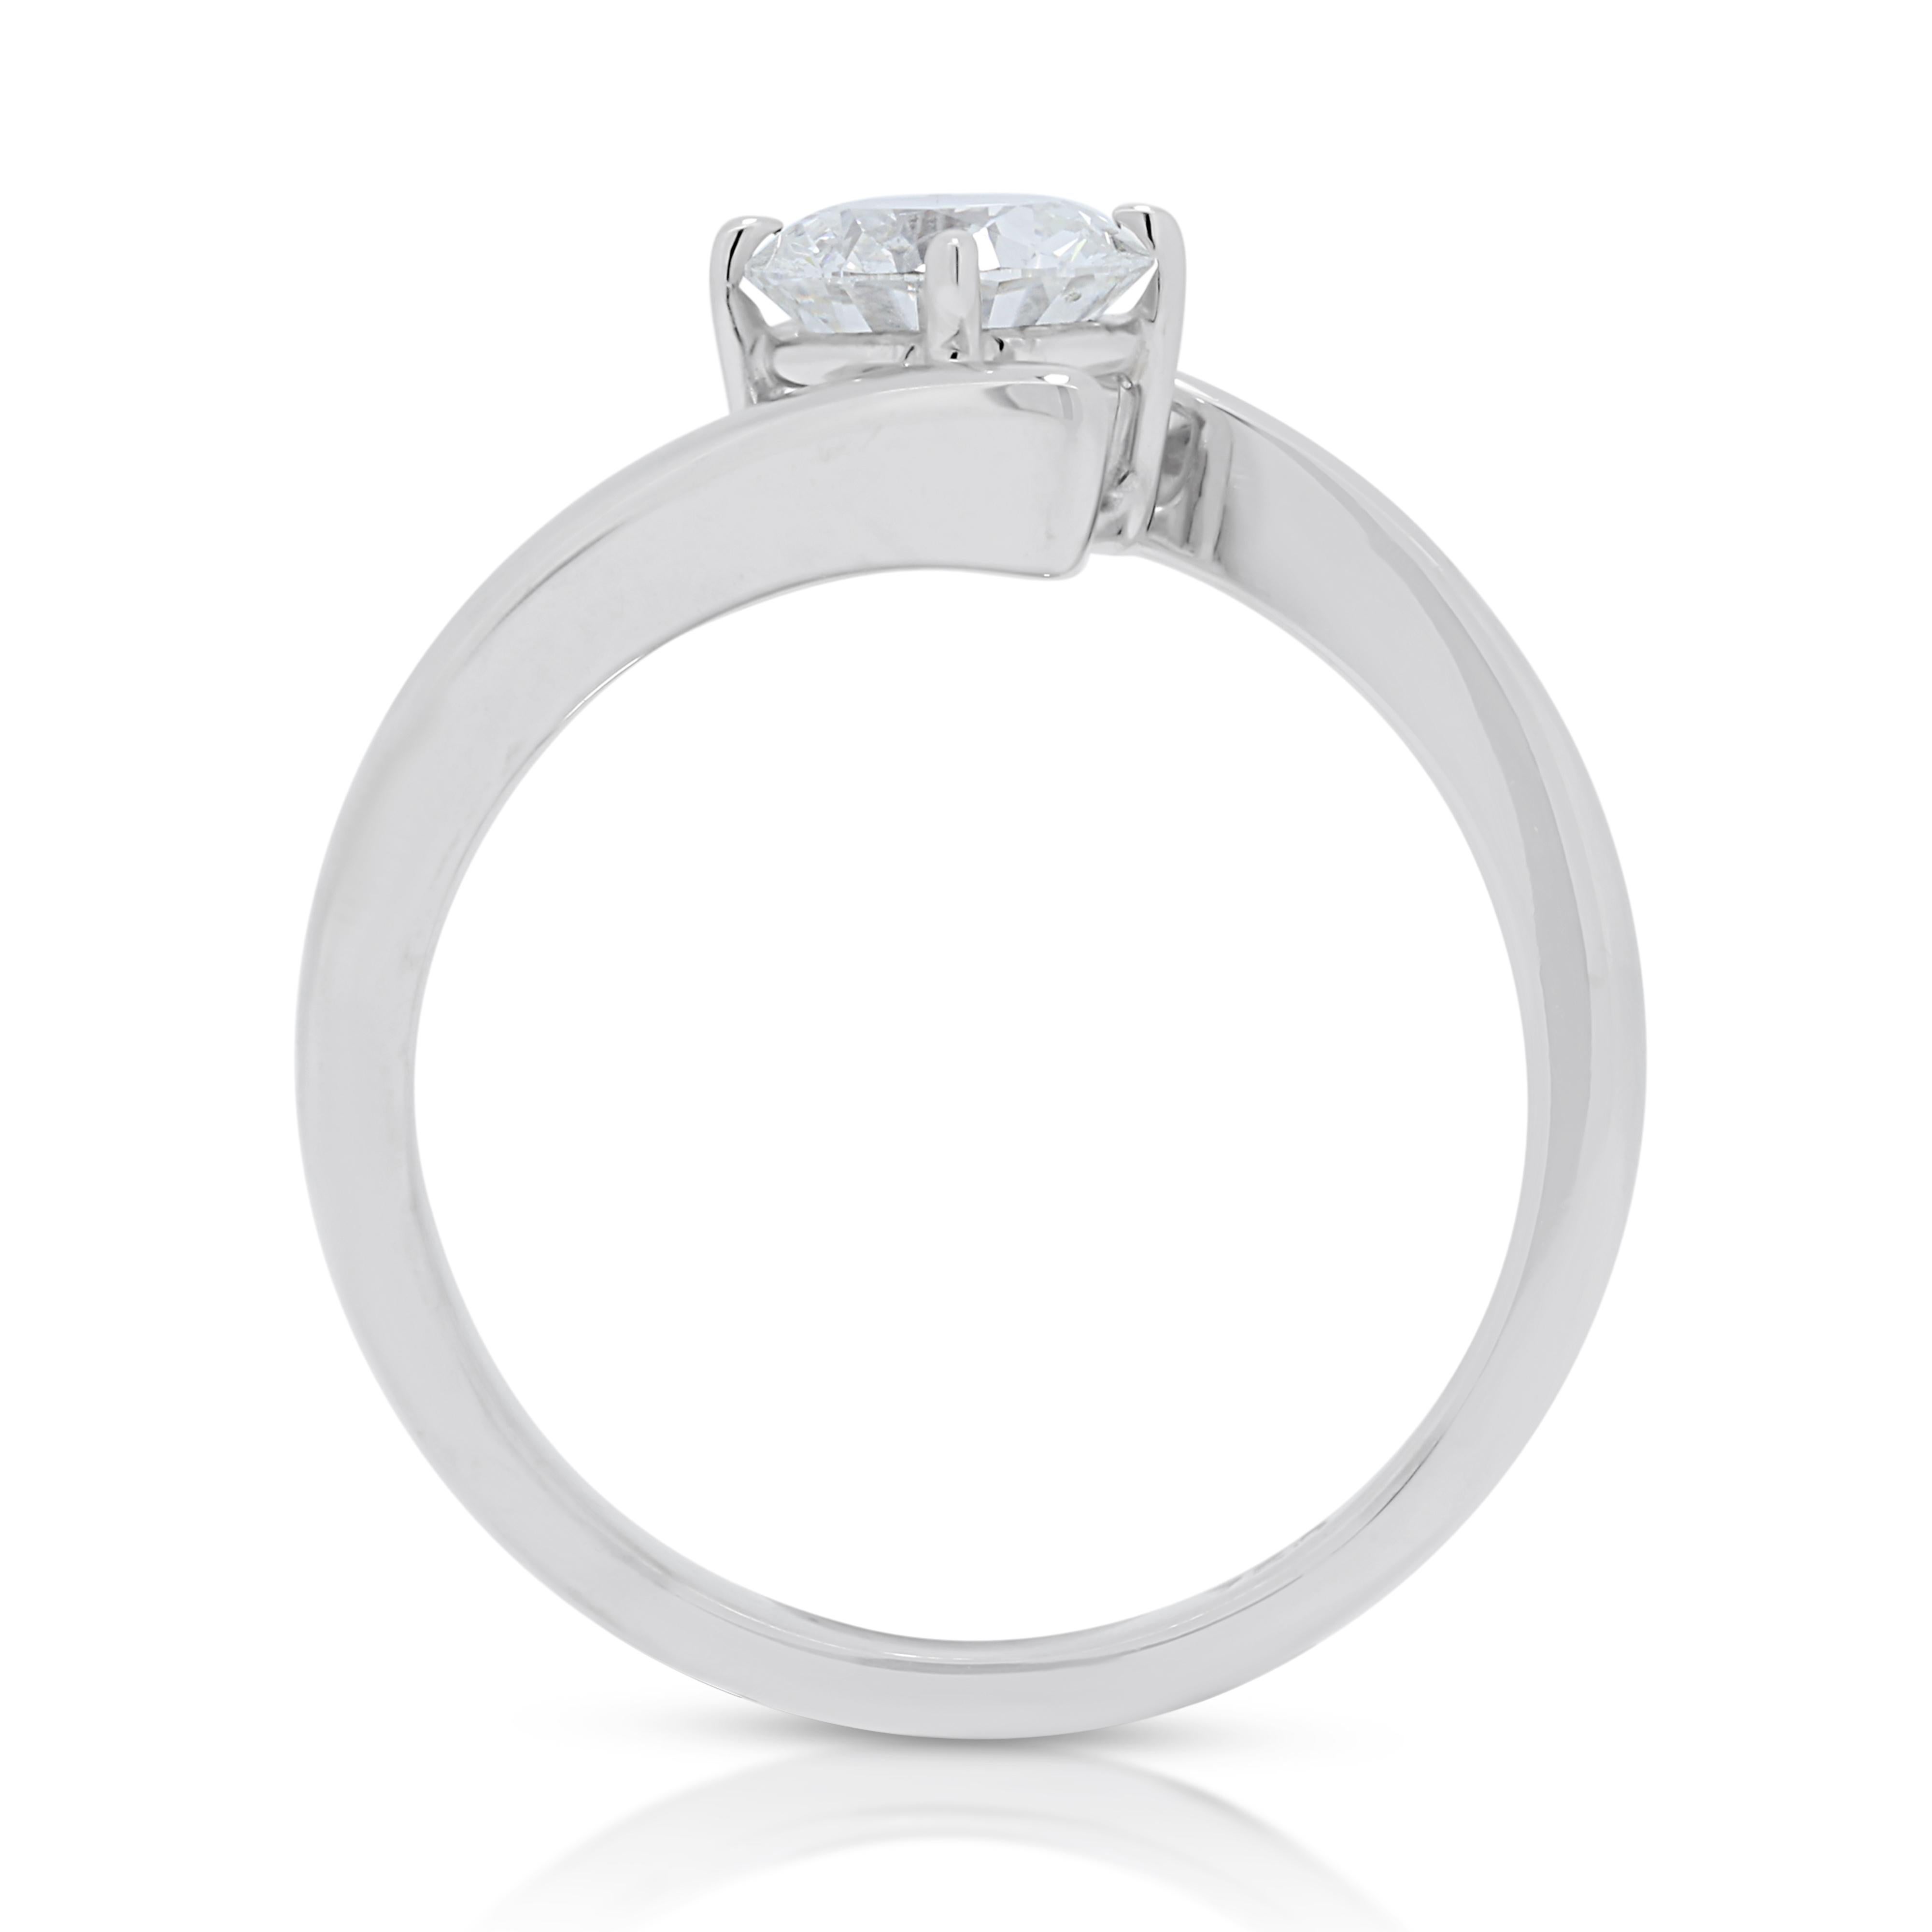 Women's Stunning 0.72ct Diamond Solitaire Ring in 18K White Gold For Sale